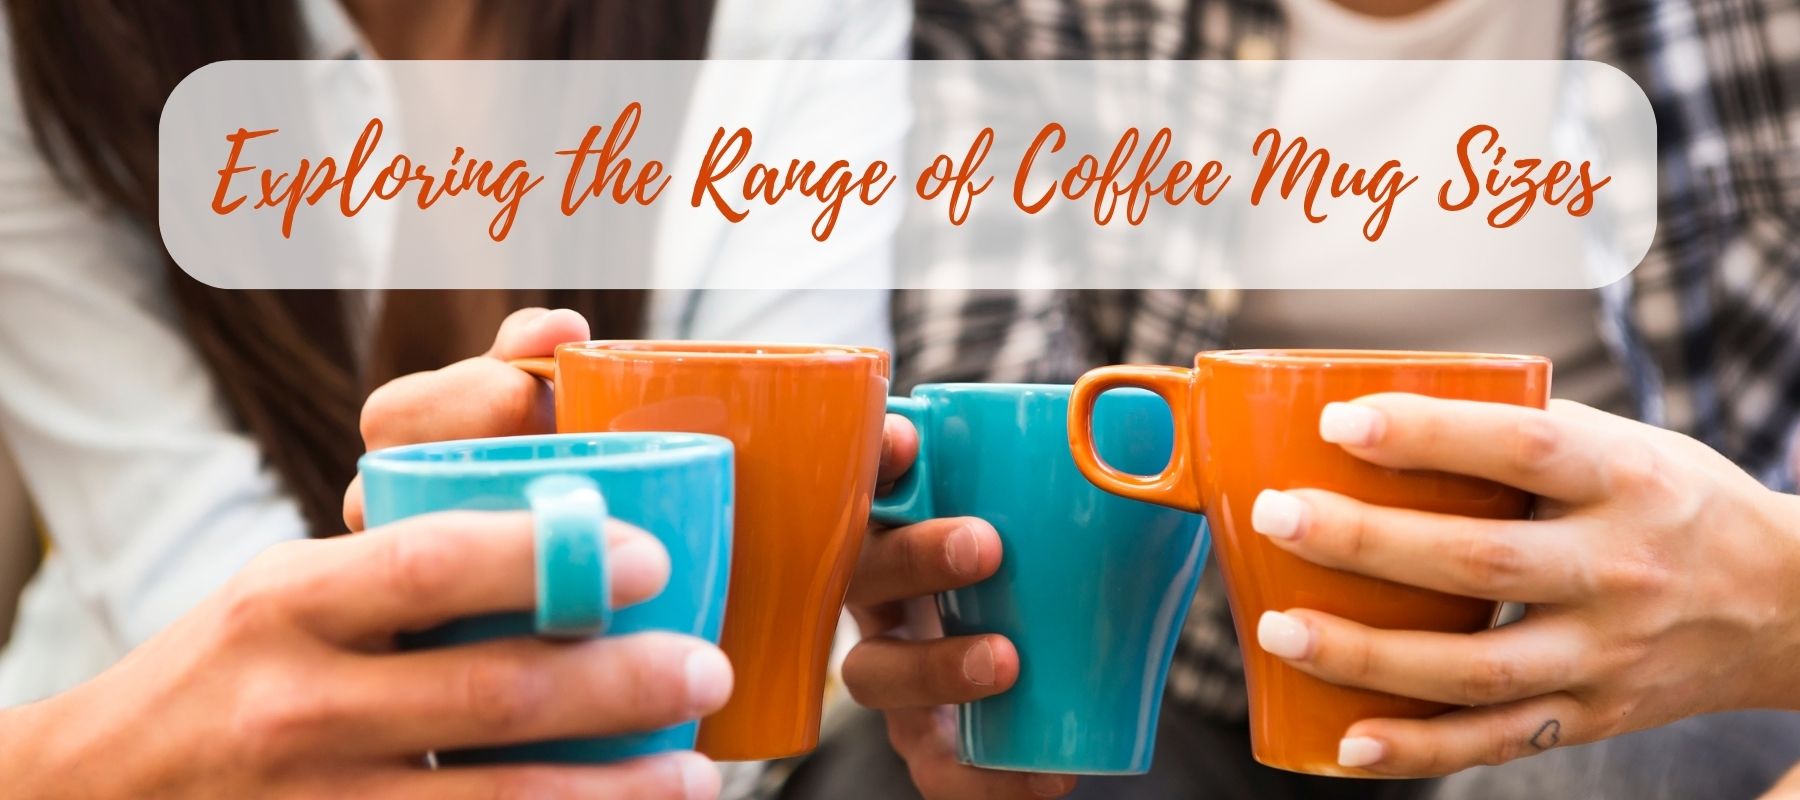 Standard Coffee Cup Sizes: A Complete Guide